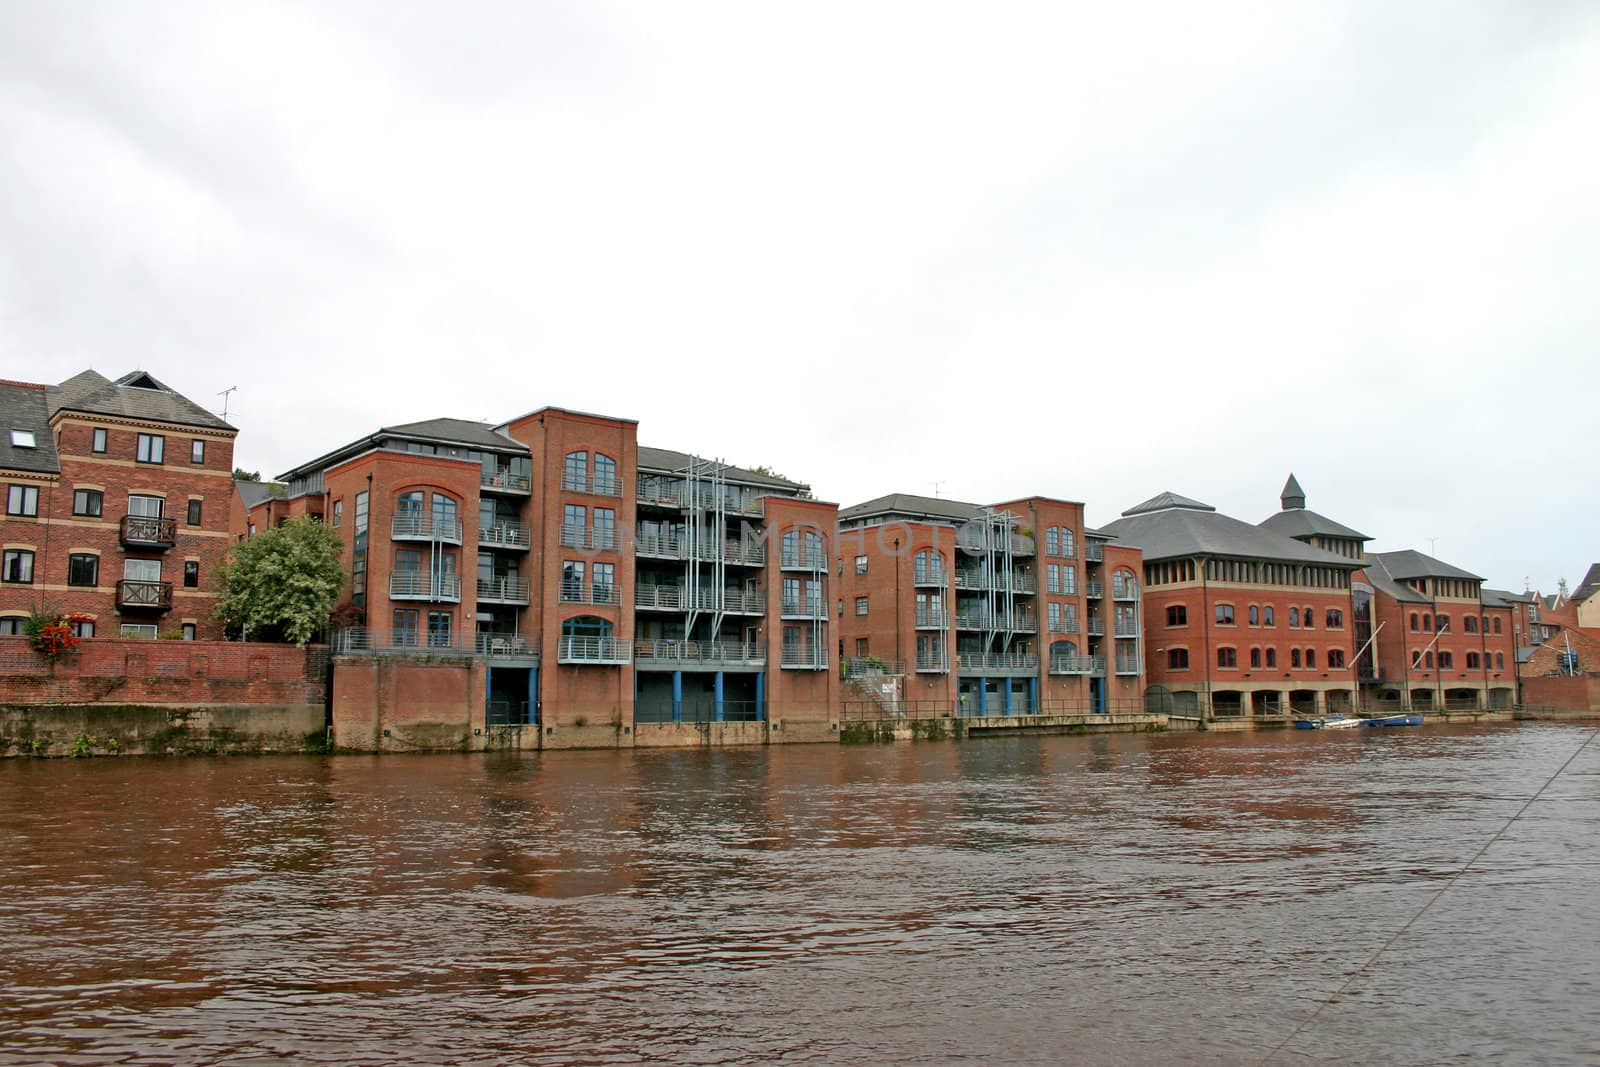 Modern Apartments on the River Ouse in York by green308